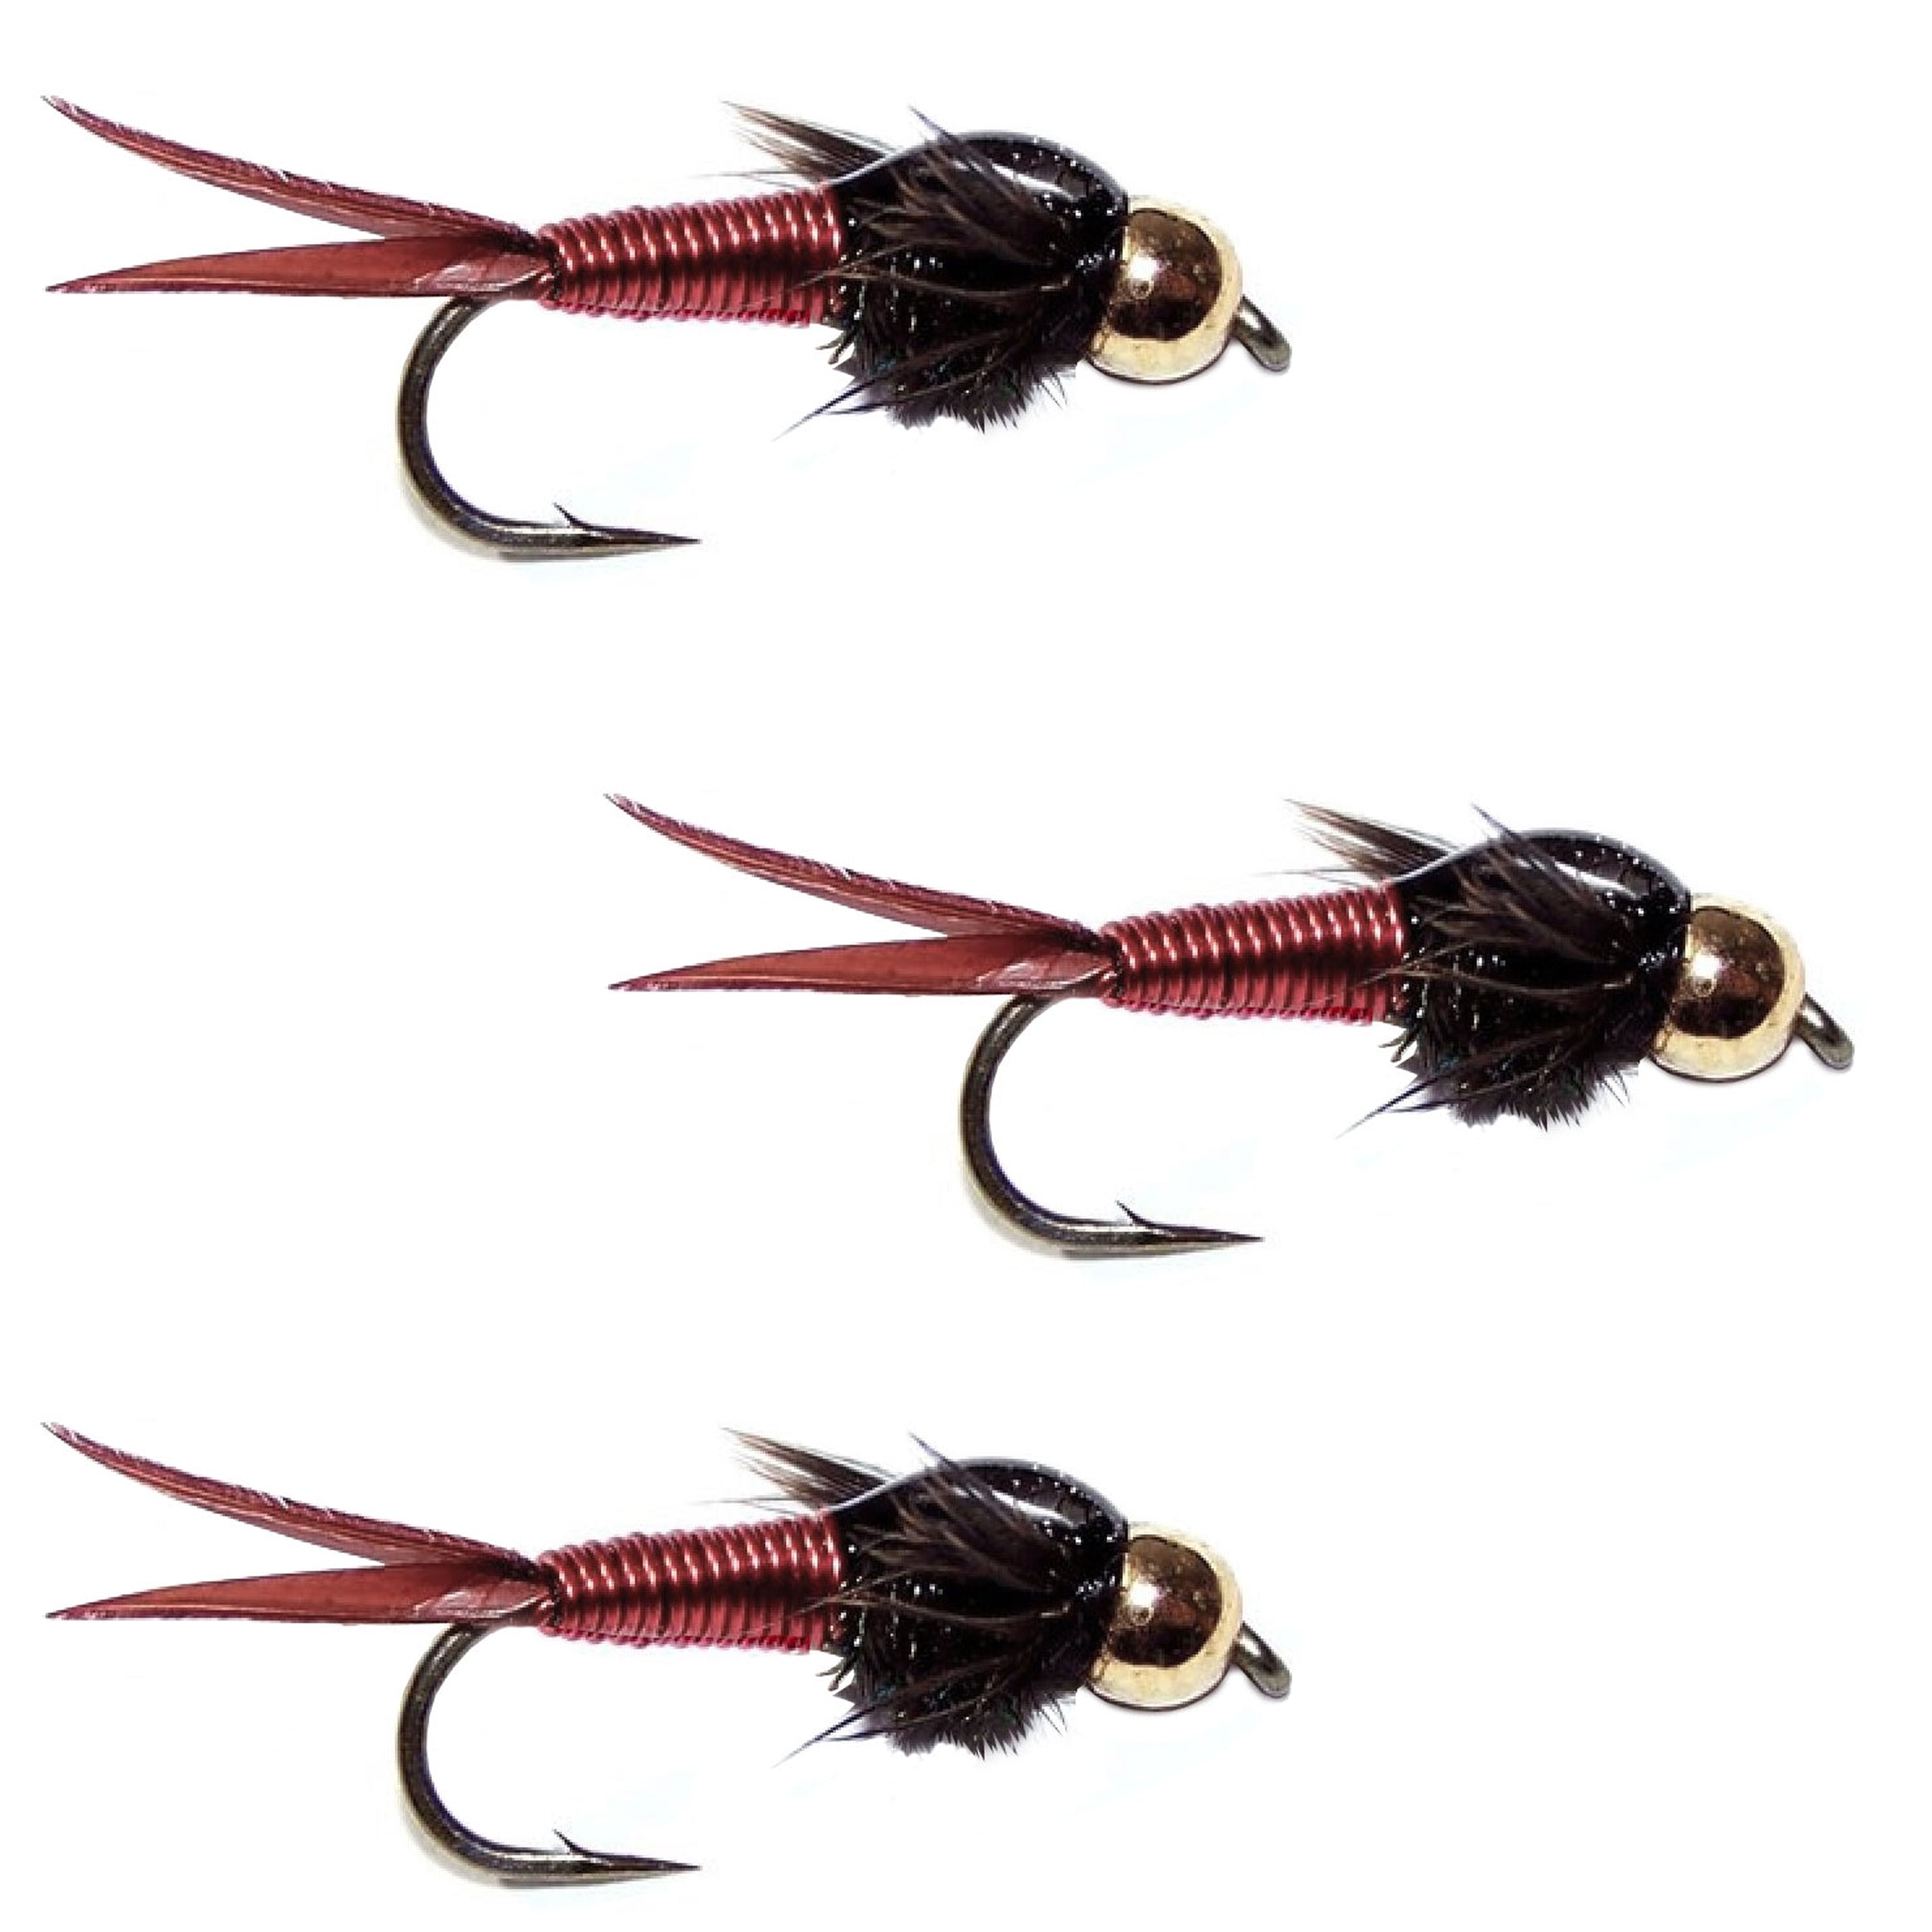 3 Pack Bead Head Red Copper John Nymph Fly Fishing Flies -  Hook Size 16